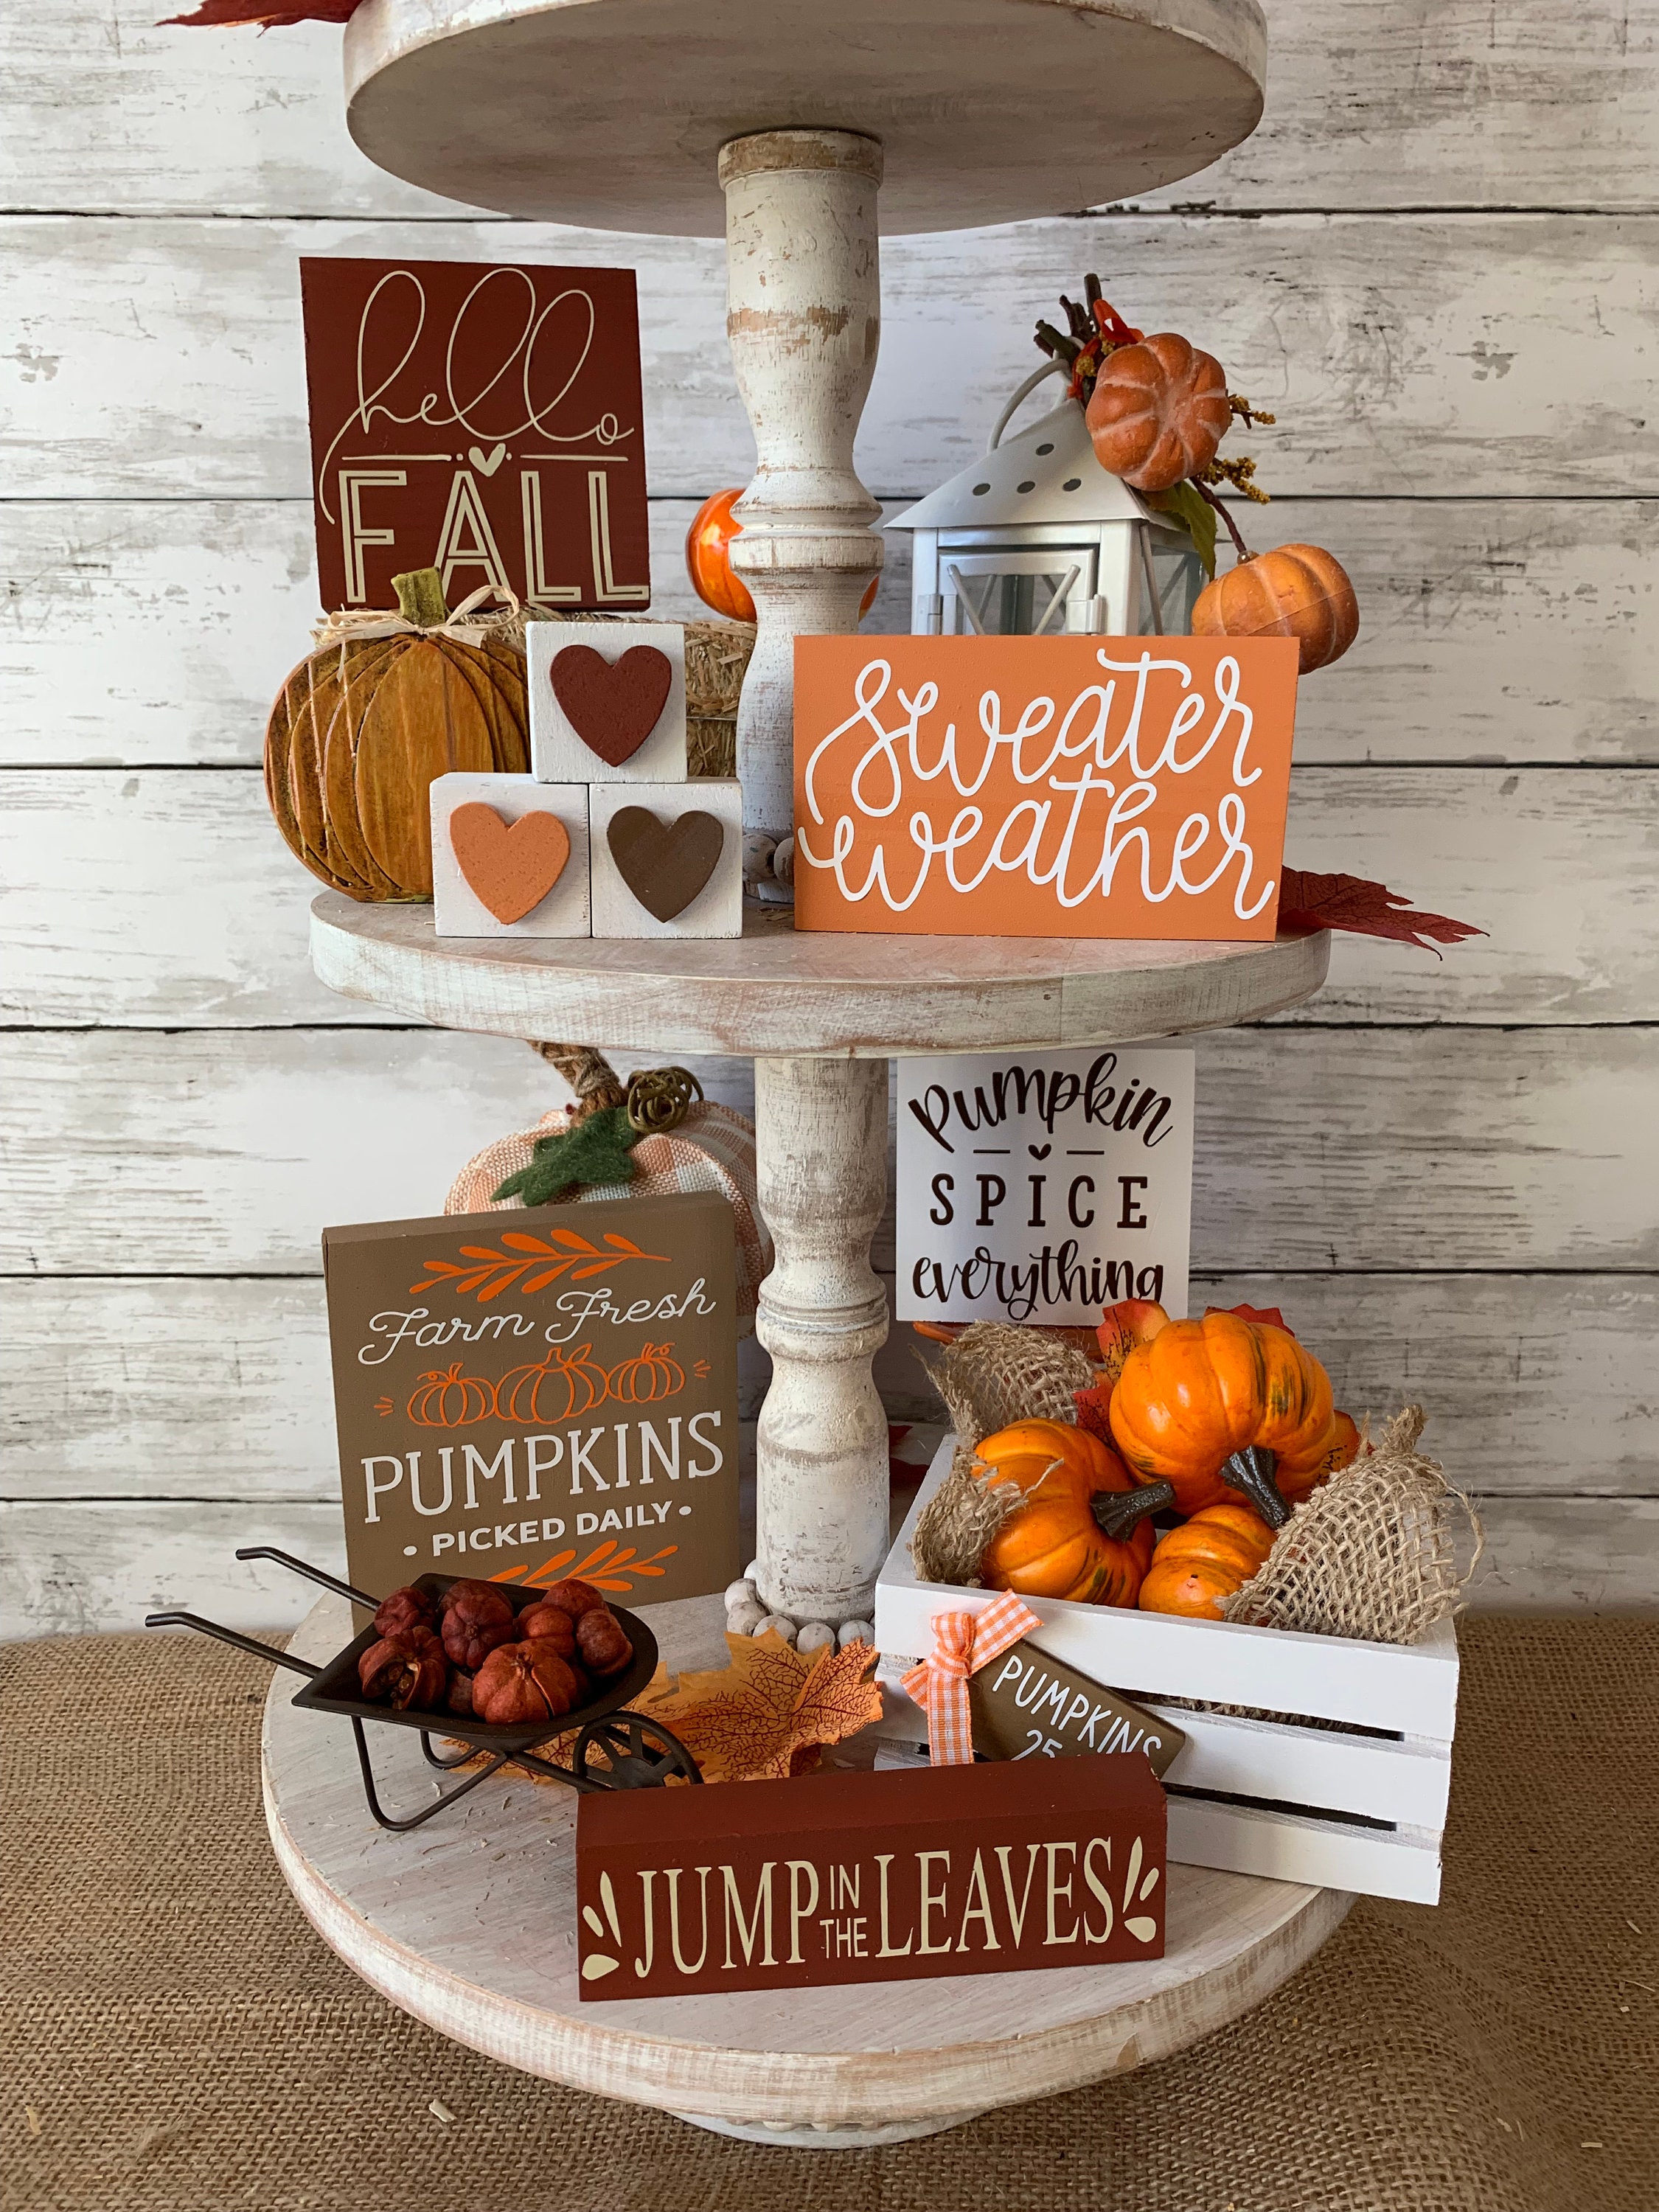  Fall Decor - Fall Decorations for Home - 2 Pack Mini